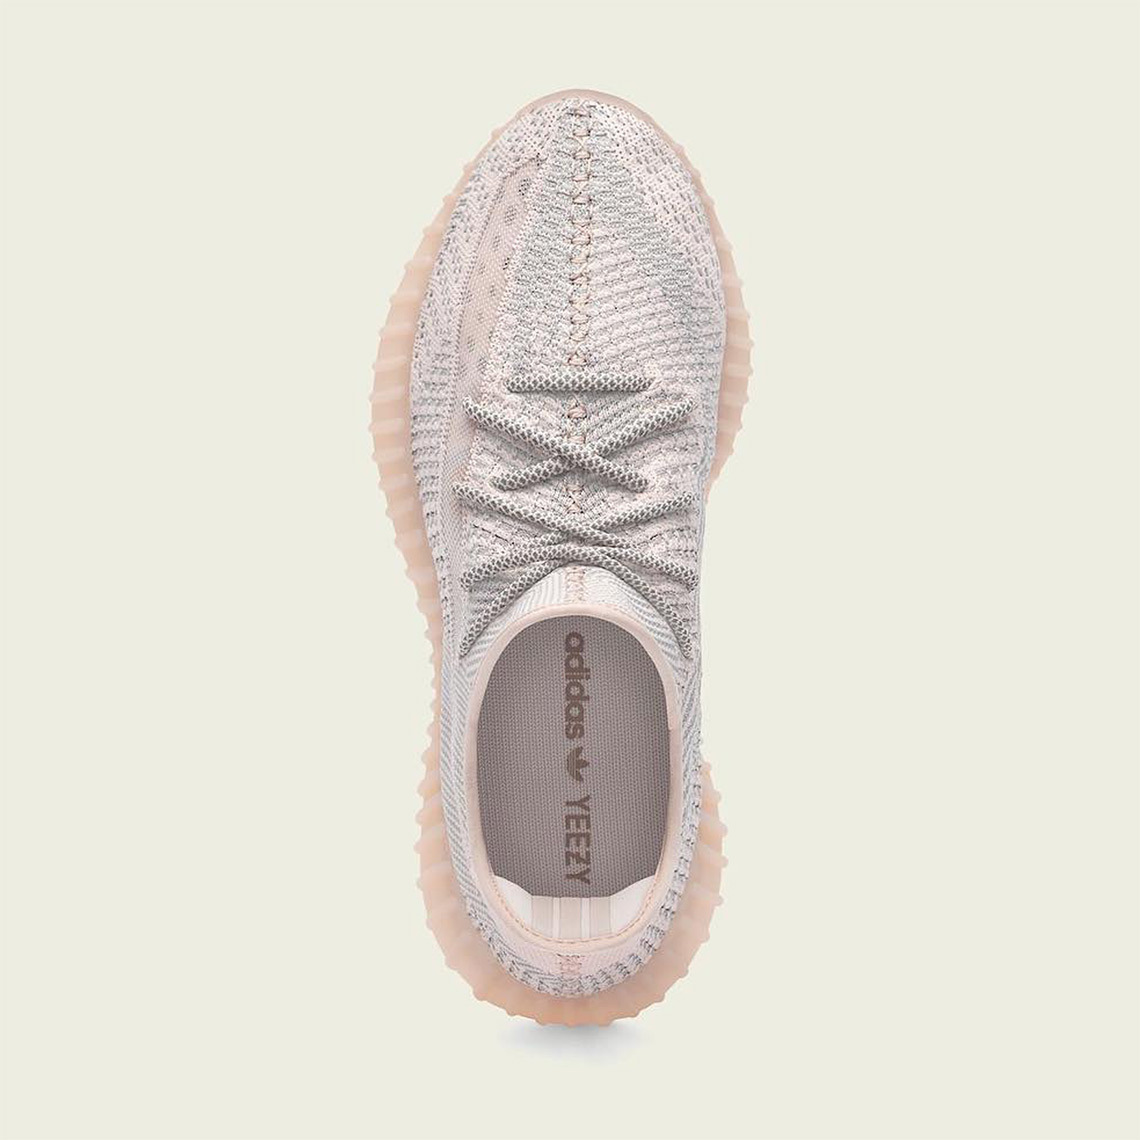 adidas Yeezy exercise 350 synth release date 2